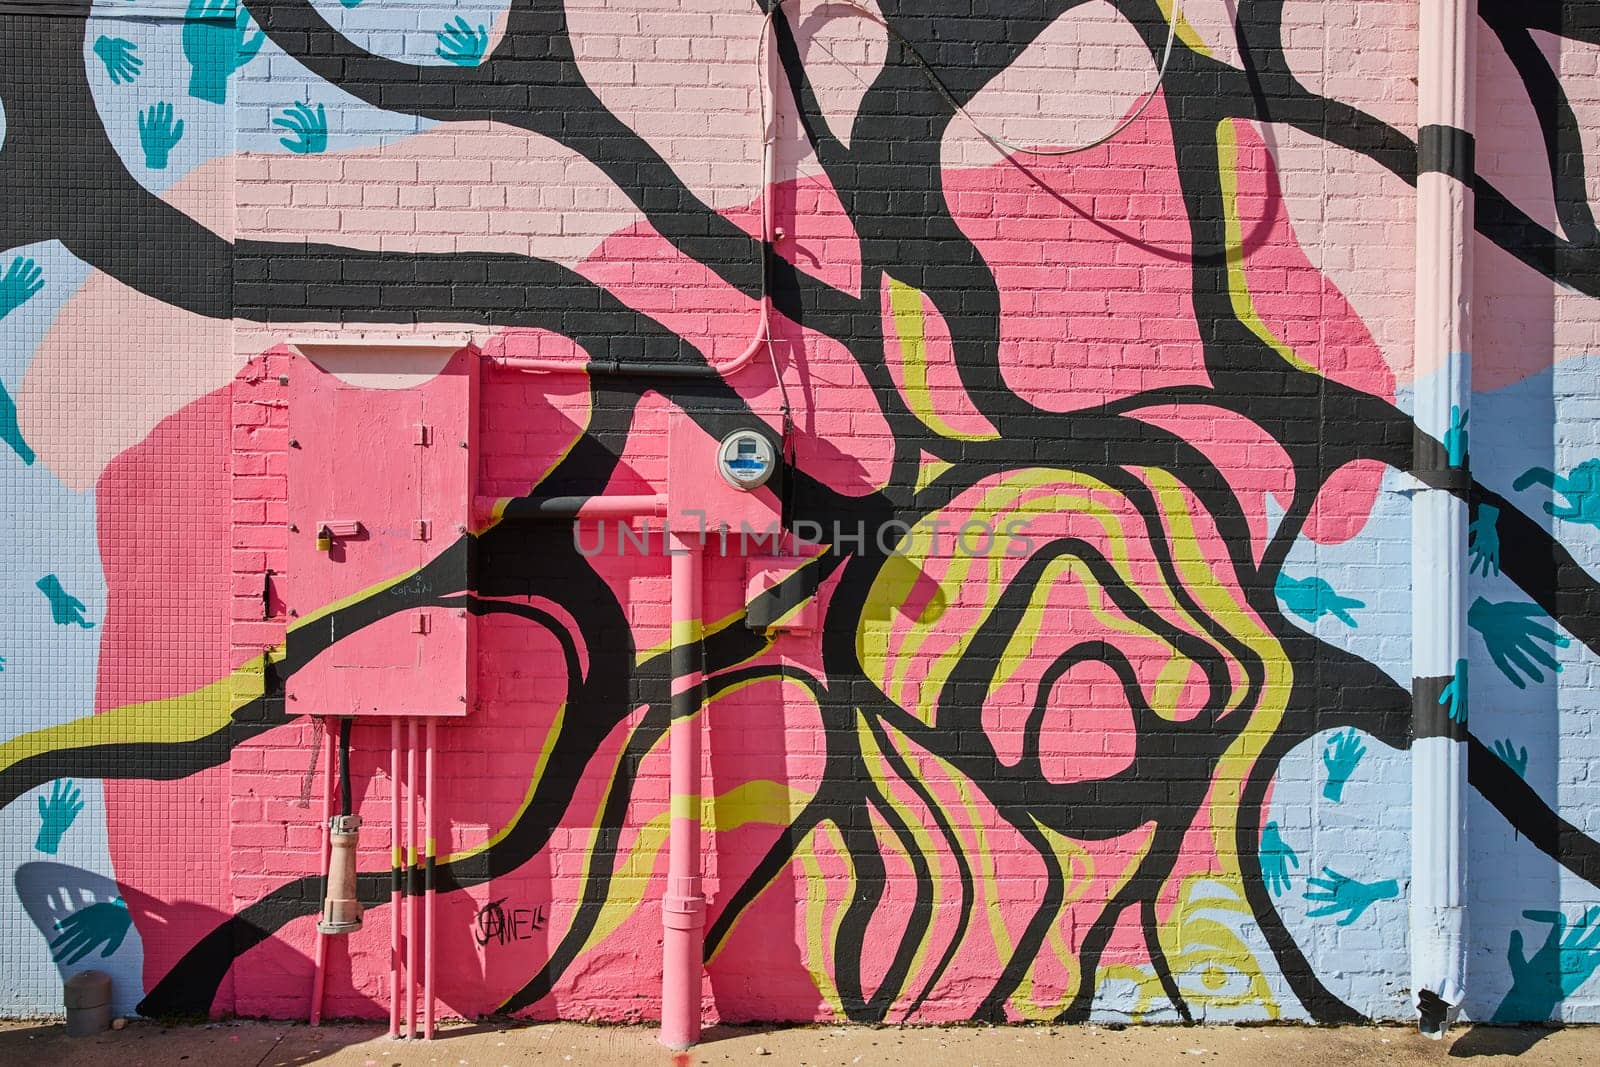 Colorful Abstract Urban Mural with Handprints on Brick Wall by njproductions